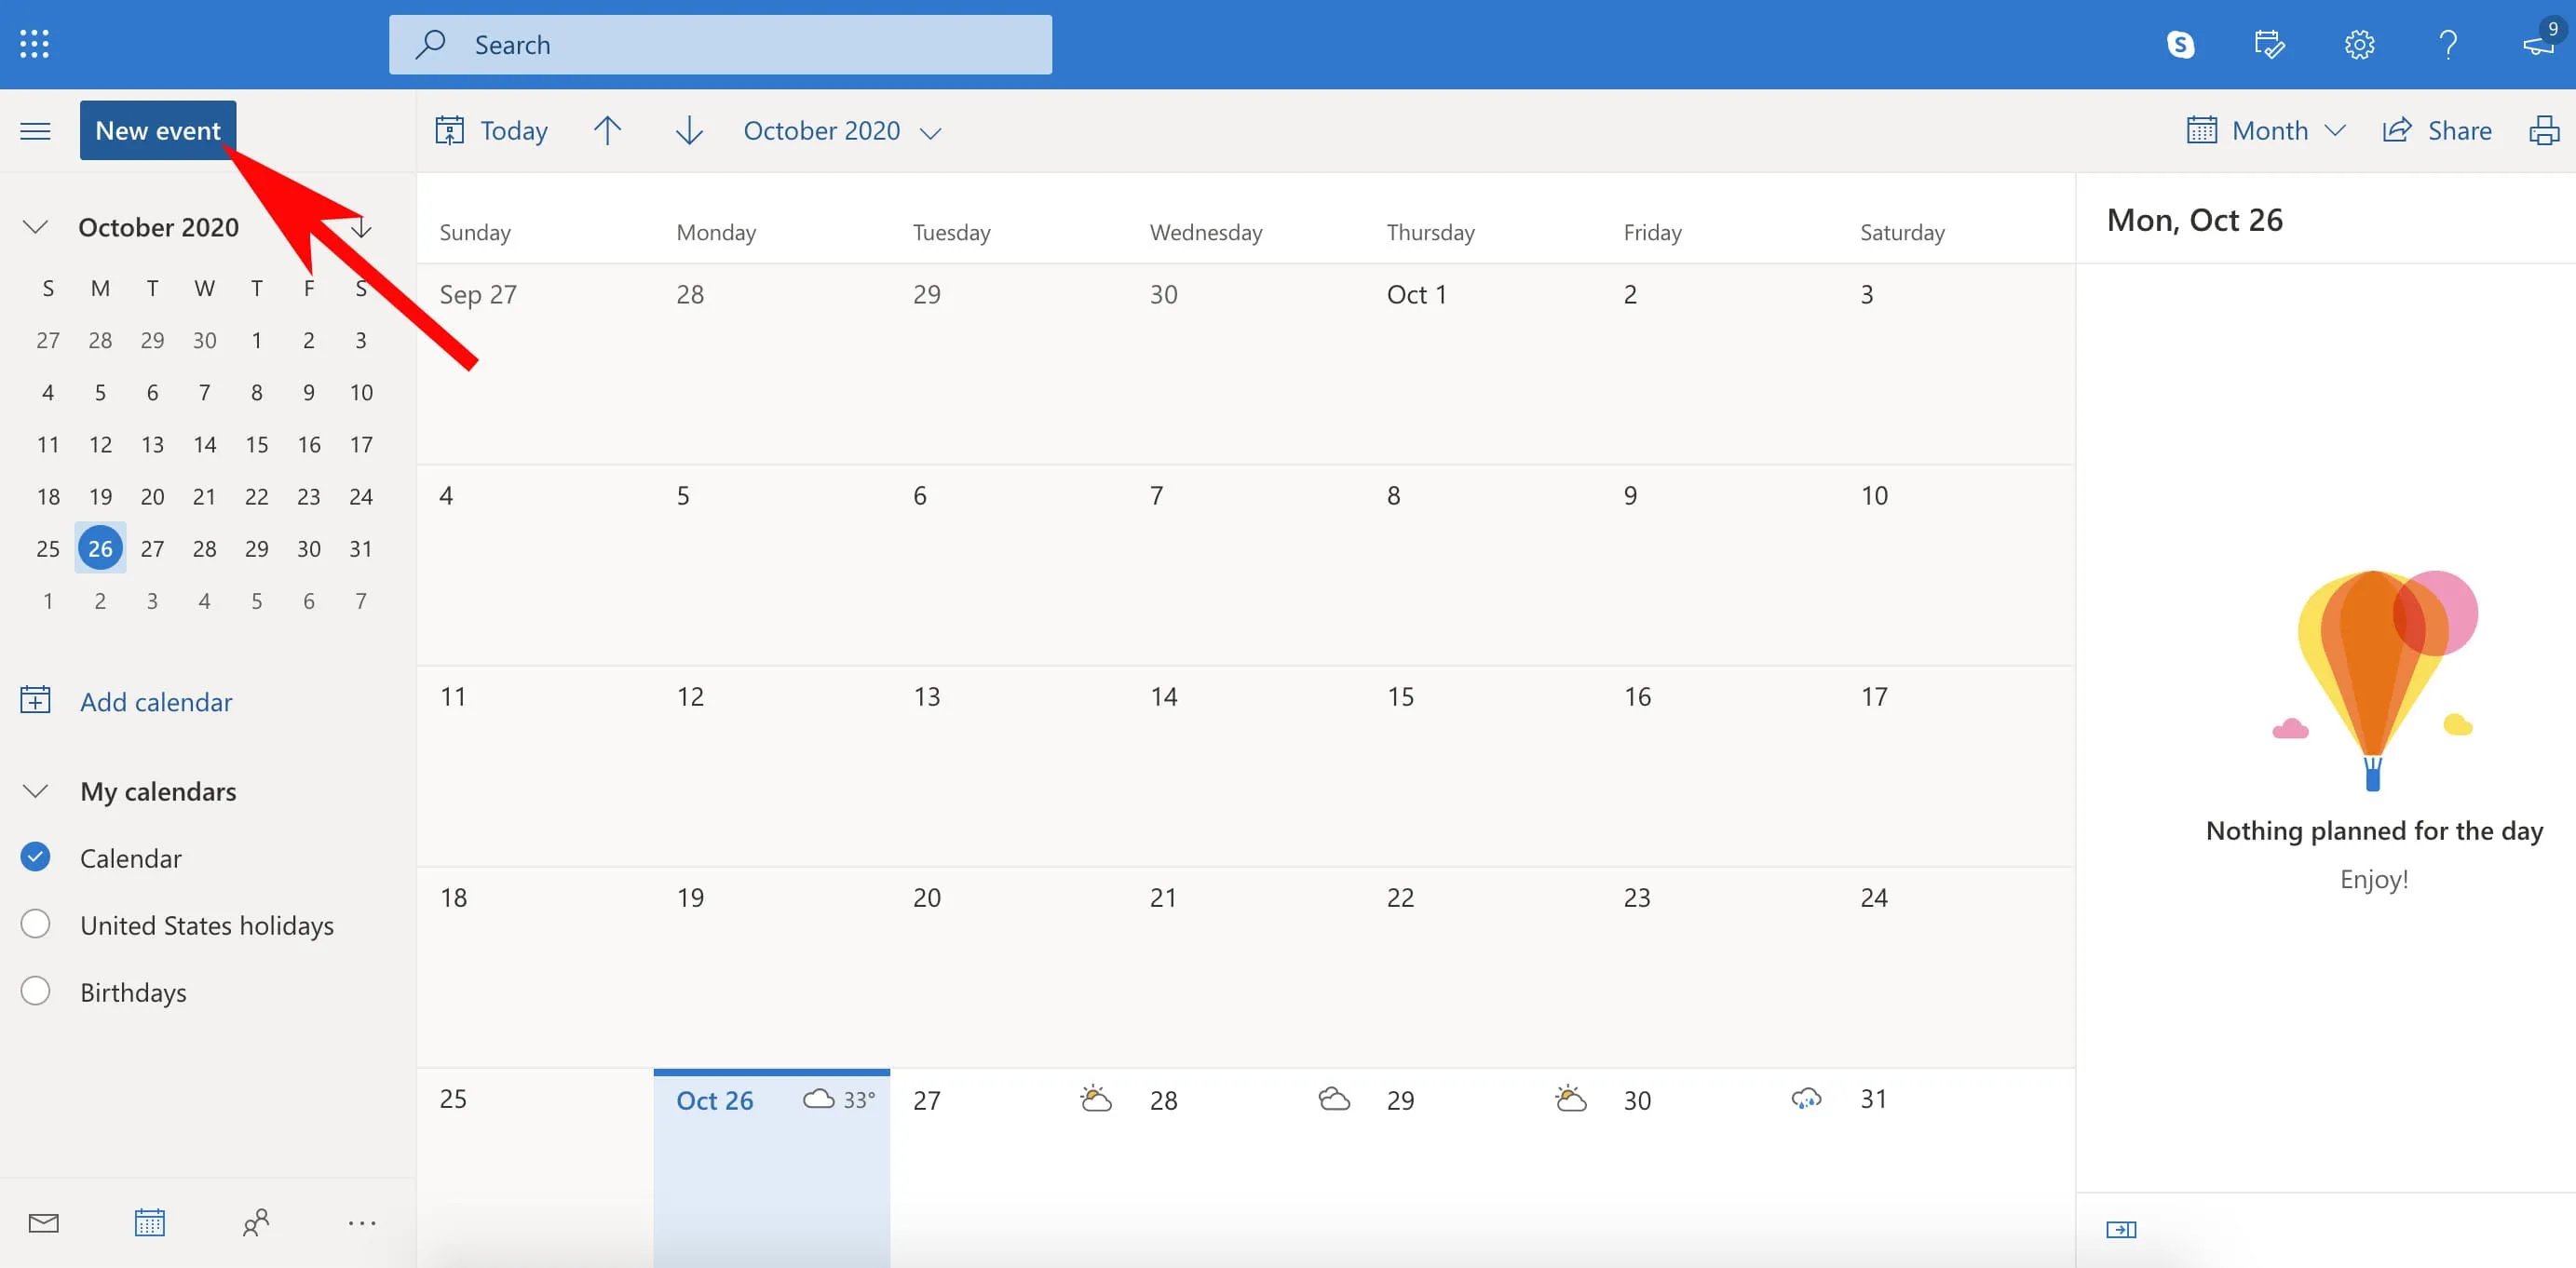 Outlook calendar home page with an arrow pointing to the new event button